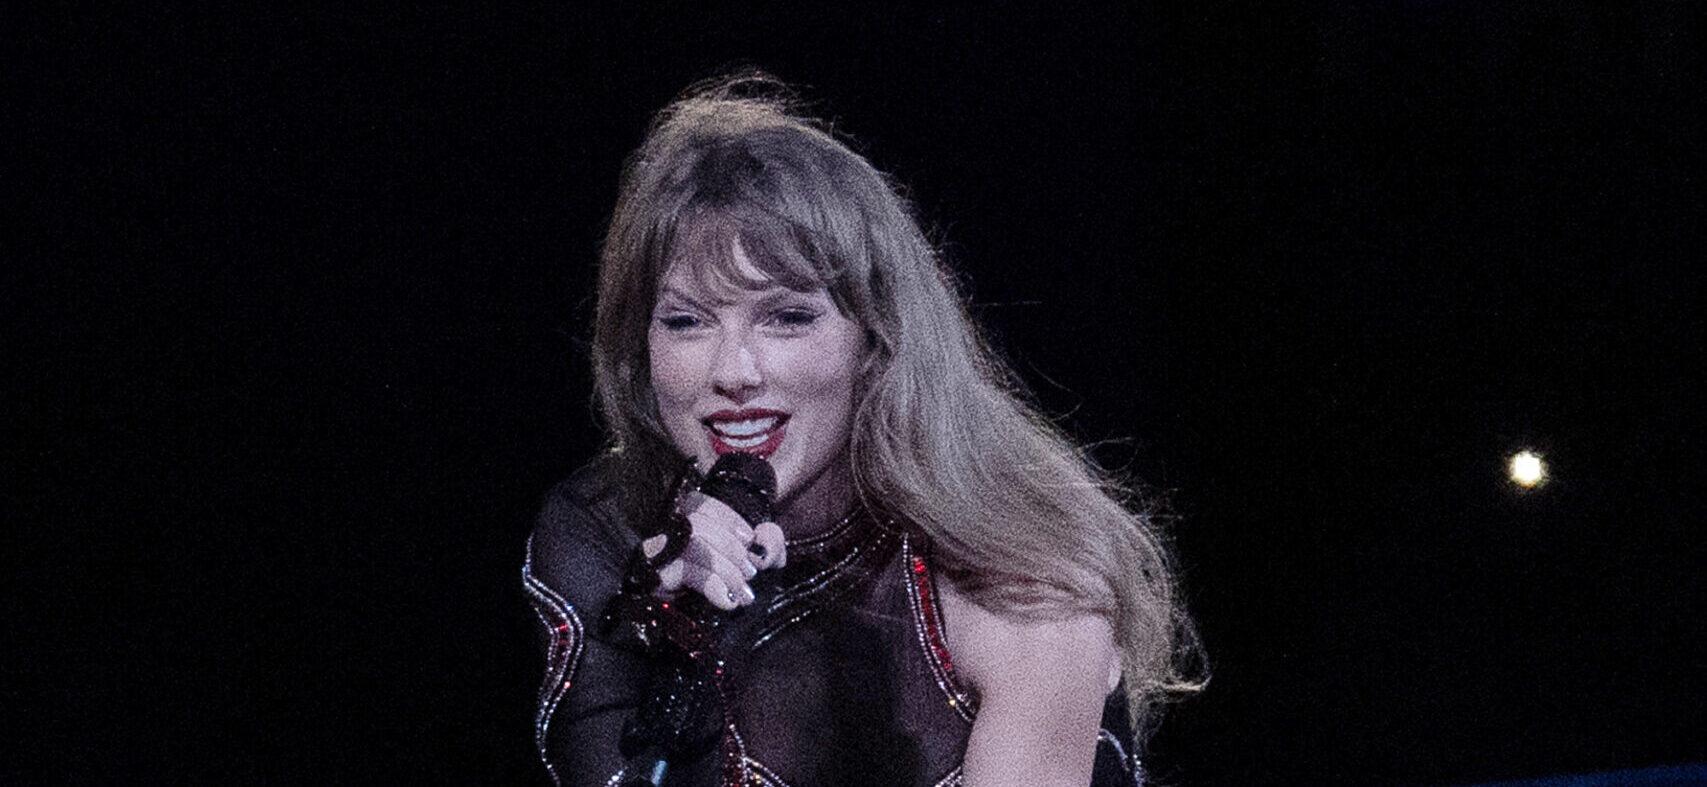 Taylor Swift delights her legion of fans as she takes to the stage in a staggering number of sparkling outfit changes during her Eras Tour stop in Tampa Florida